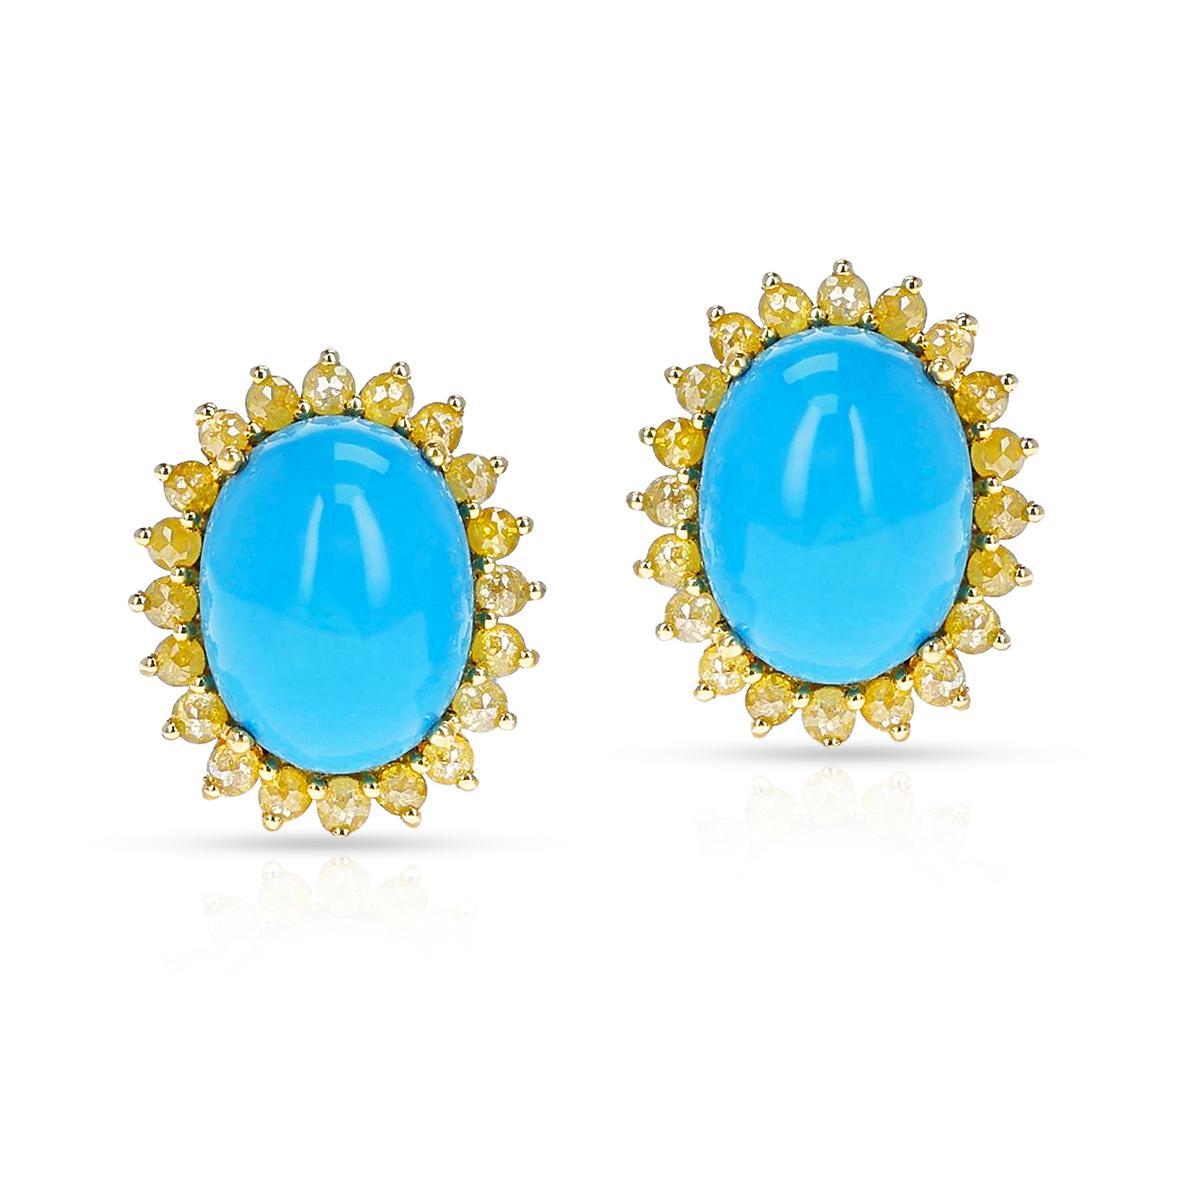 A pair of GIA Certified Natural Turquoise Cabochon Earrings with Yellow Diamonds, made in 18 karat yellow gold. The total weight of the earrings is 10.07 grams. 
